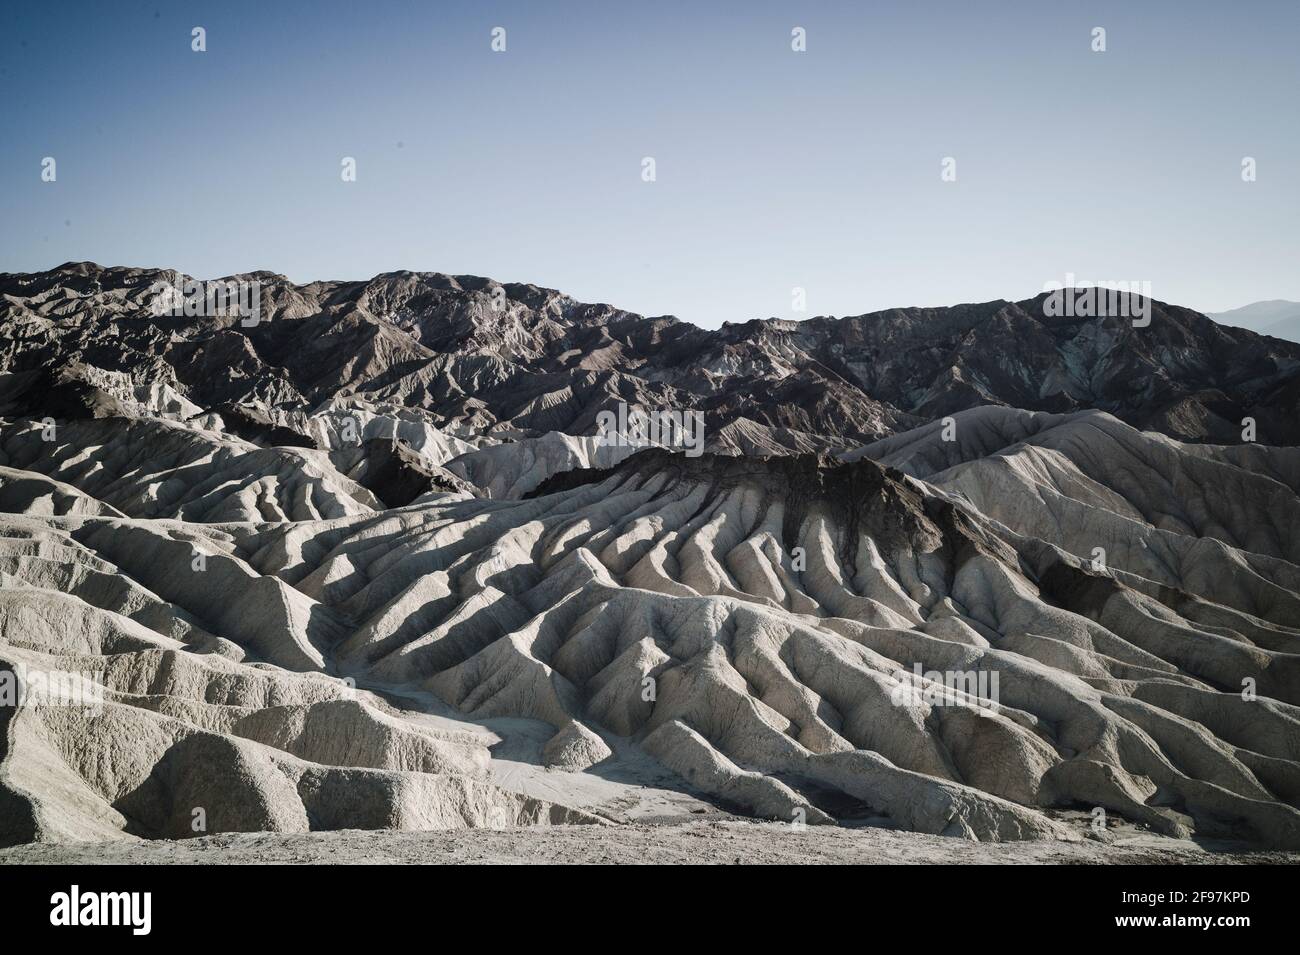 A picturesque desert-Scene with heavily eroded Ridges taken at the well-known Zabriskie Point, Death Valley National Park, California, USA Stock Photo